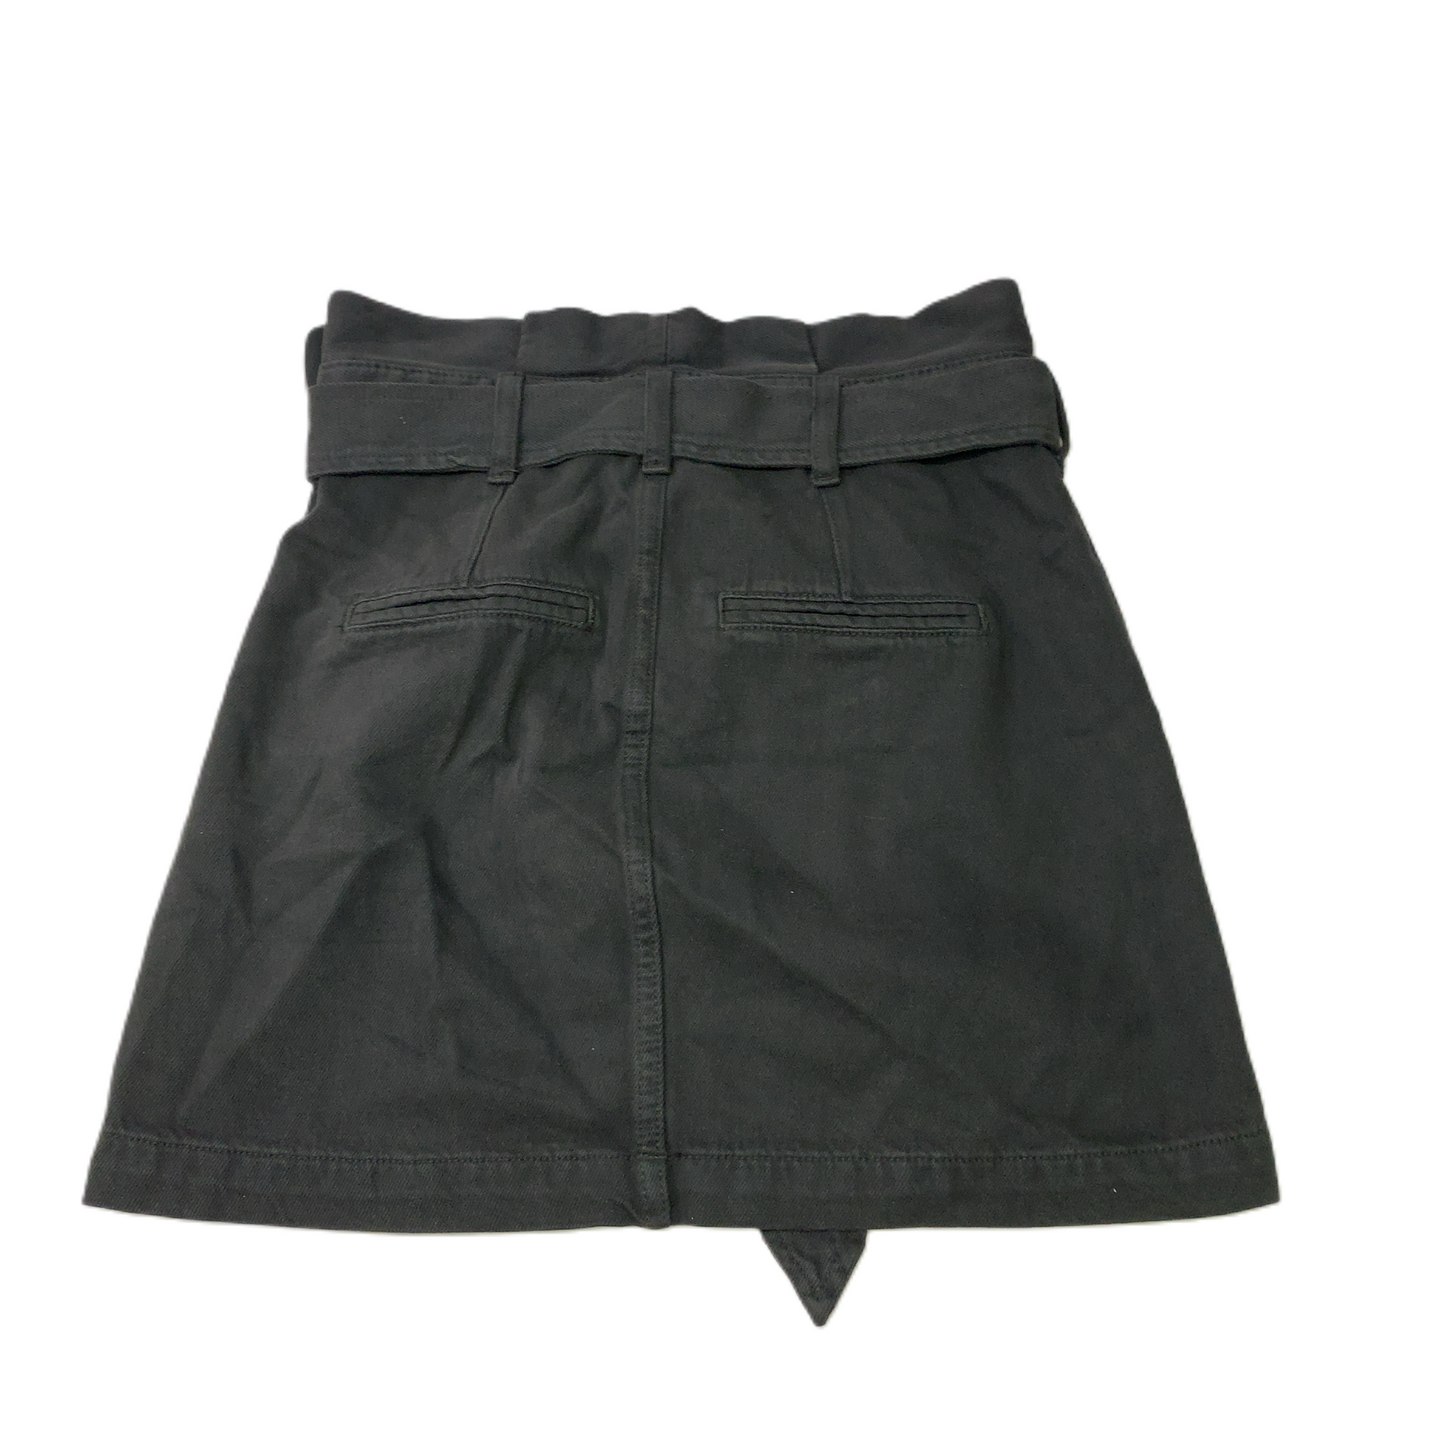 Skirt Designer By Joes Jeans  Size: S